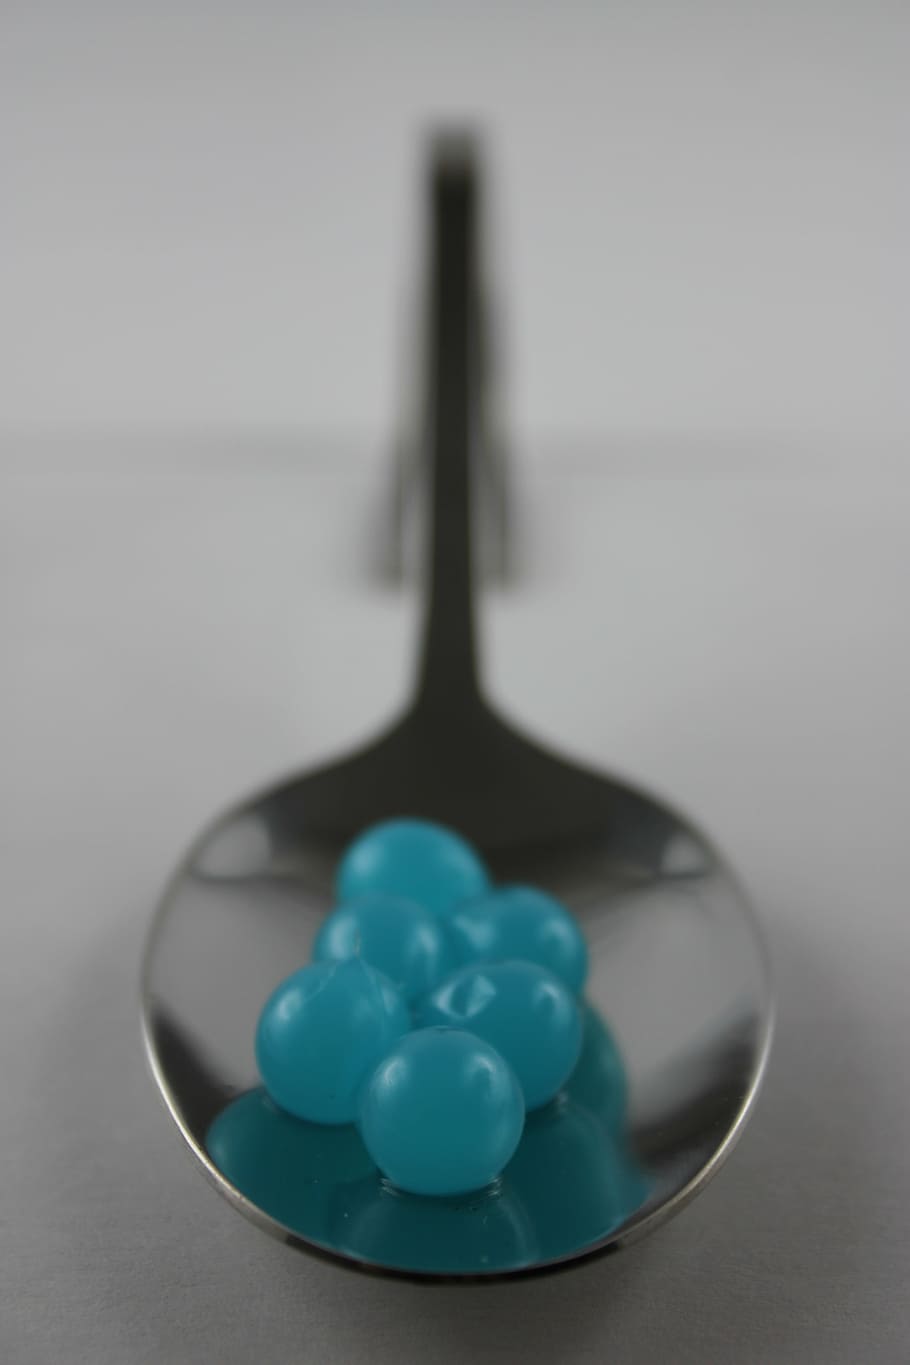 beads, pearls, molecular gastronomy, gastronomy, juice, color, close-up, indoors, still life, table